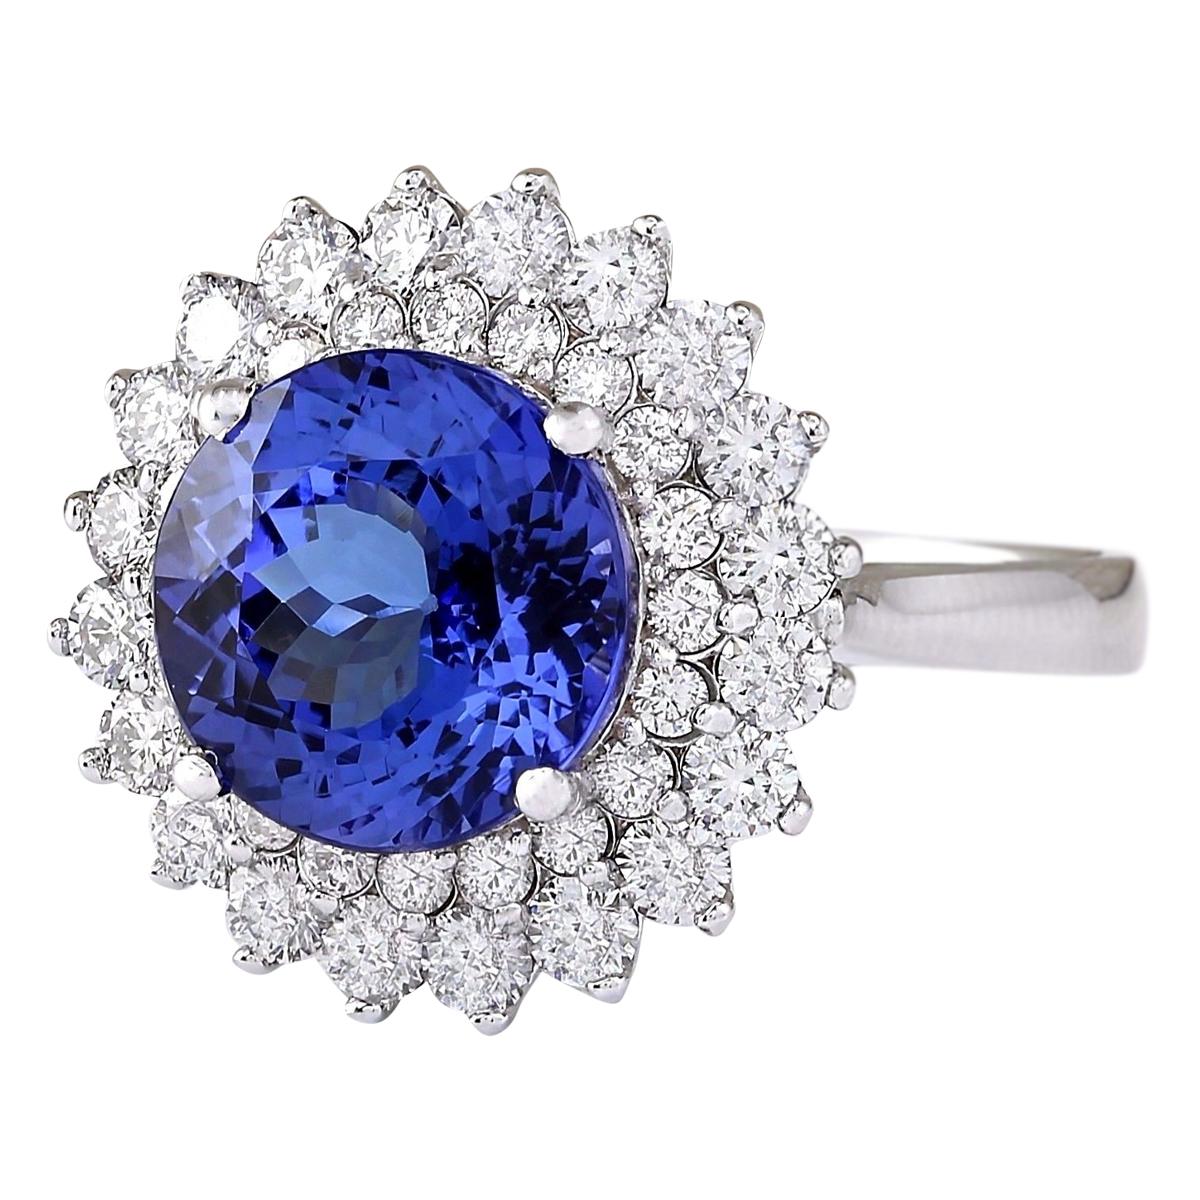 Stamped: 14K White Gold
Total Ring Weight: 6.1 Grams
Total Natural Tanzanite Weight is 4.48 Carat (Measures: 9.50x9.50 mm)
Color: Blue
Total Natural Diamond Weight is 1.20 Carat
Color: F-G, Clarity: VS2-SI1
Face Measures: 17.20x17.20 mm
Sku: